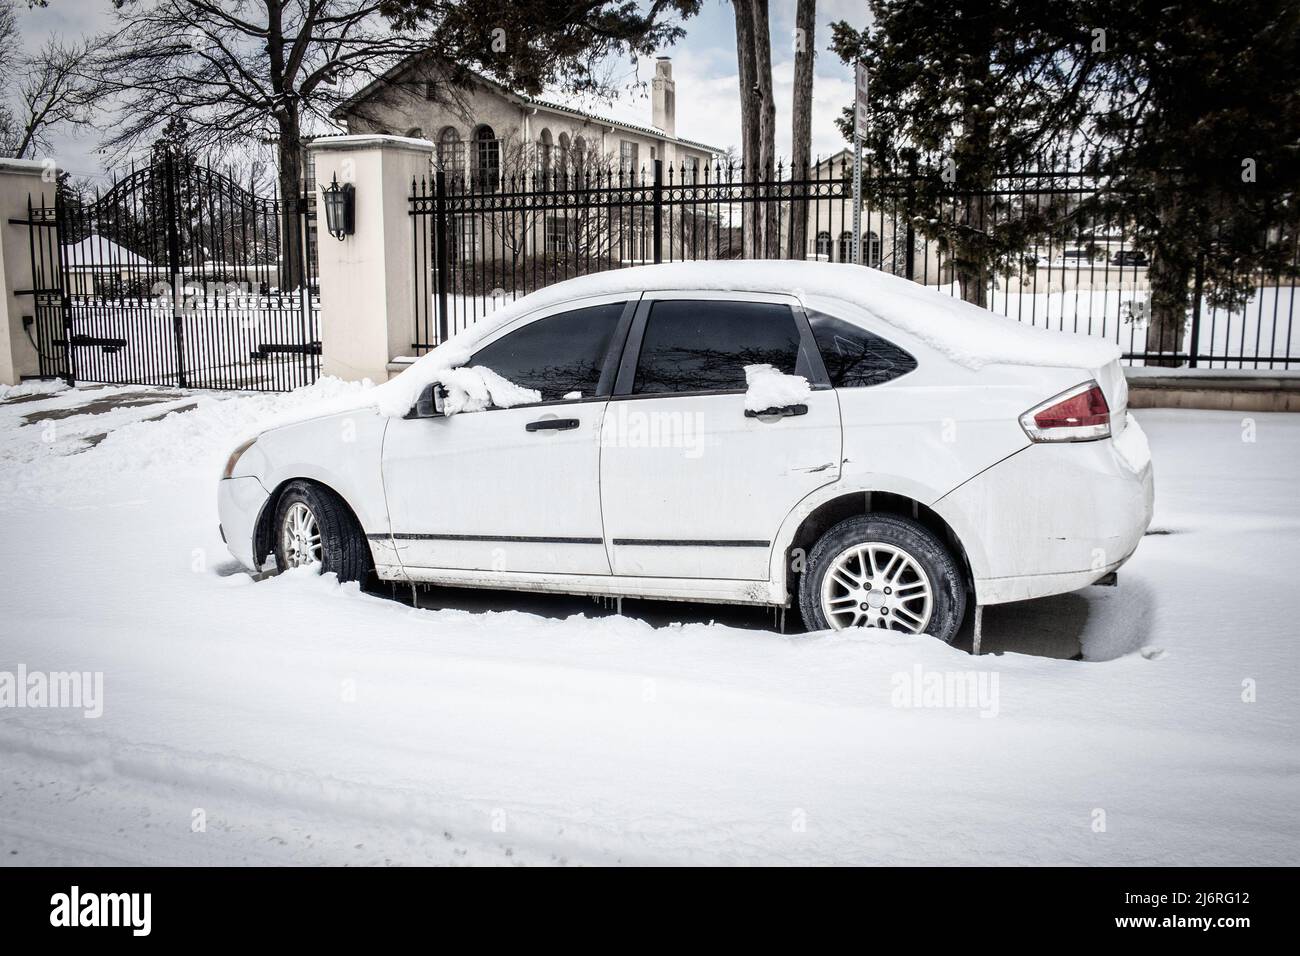 Dirty white car with scuffs parked in deep  snow on residential street outside tall fence with luxury mansion and estate in background. Stock Photo